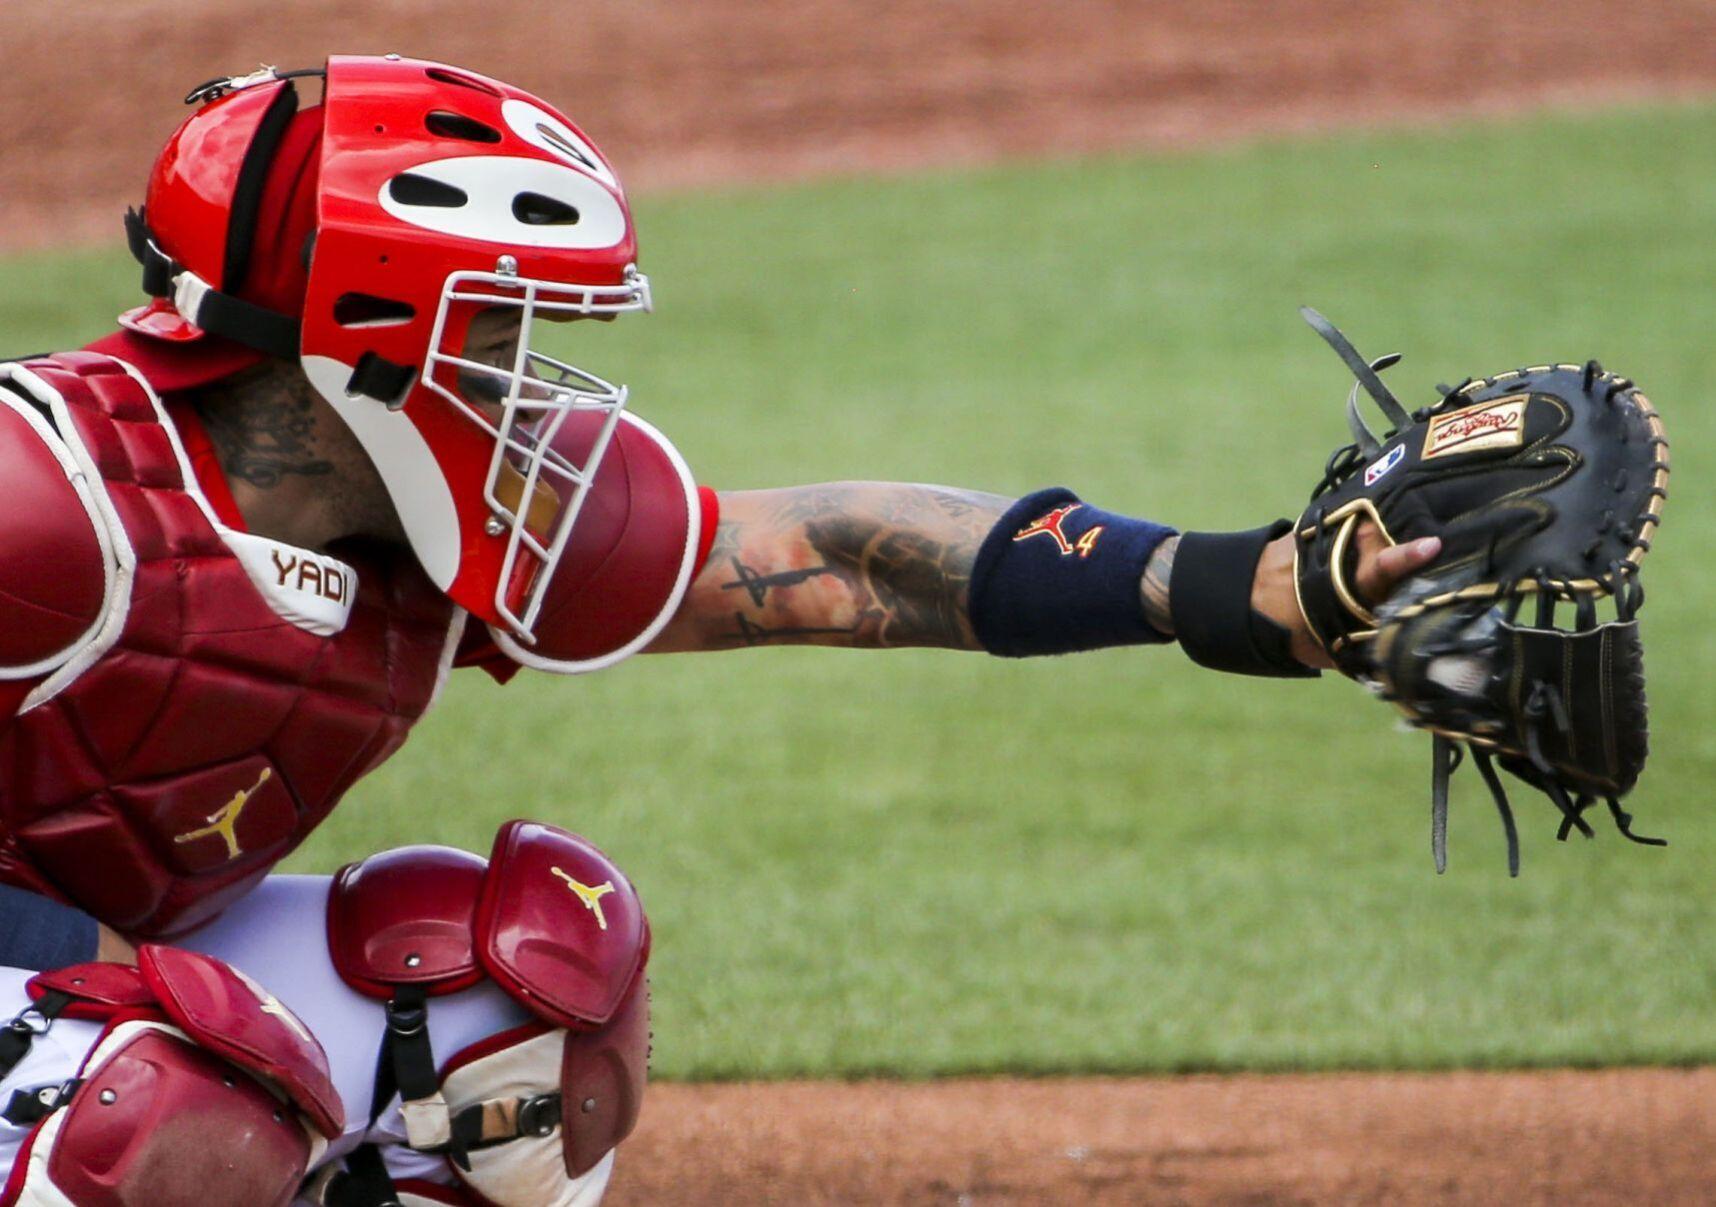 St. Louis Cardinals: Who should be the starting catcher upon Yadi's return?